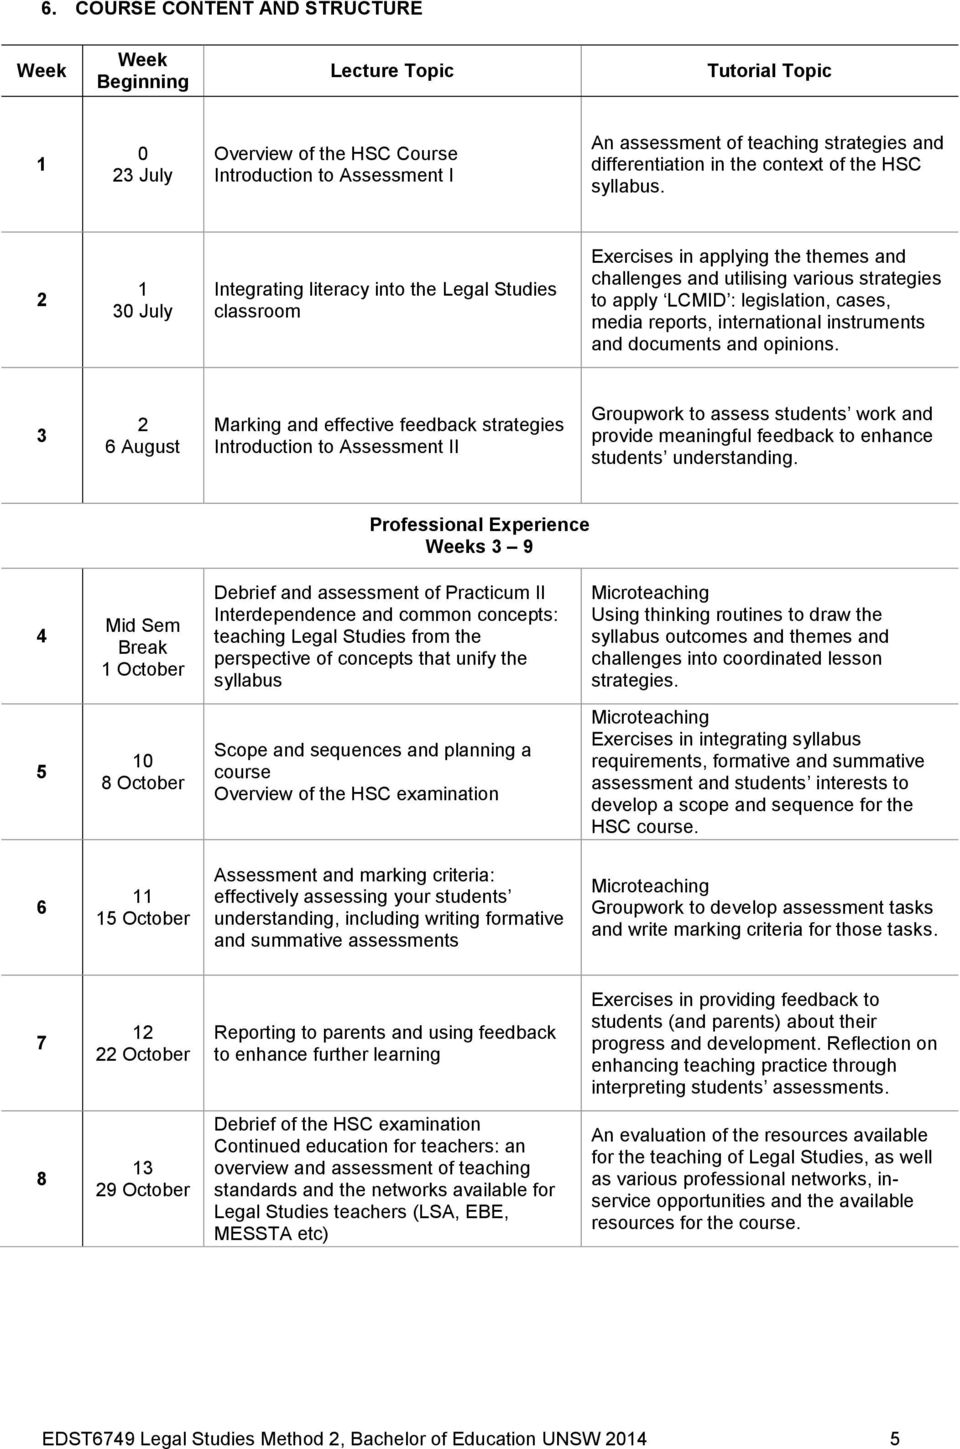 2 1 30 July Integrating literacy into the Legal Studies classroom Exercises in applying the themes and challenges and utilising various strategies to apply LCMID : legislation, cases, media reports,